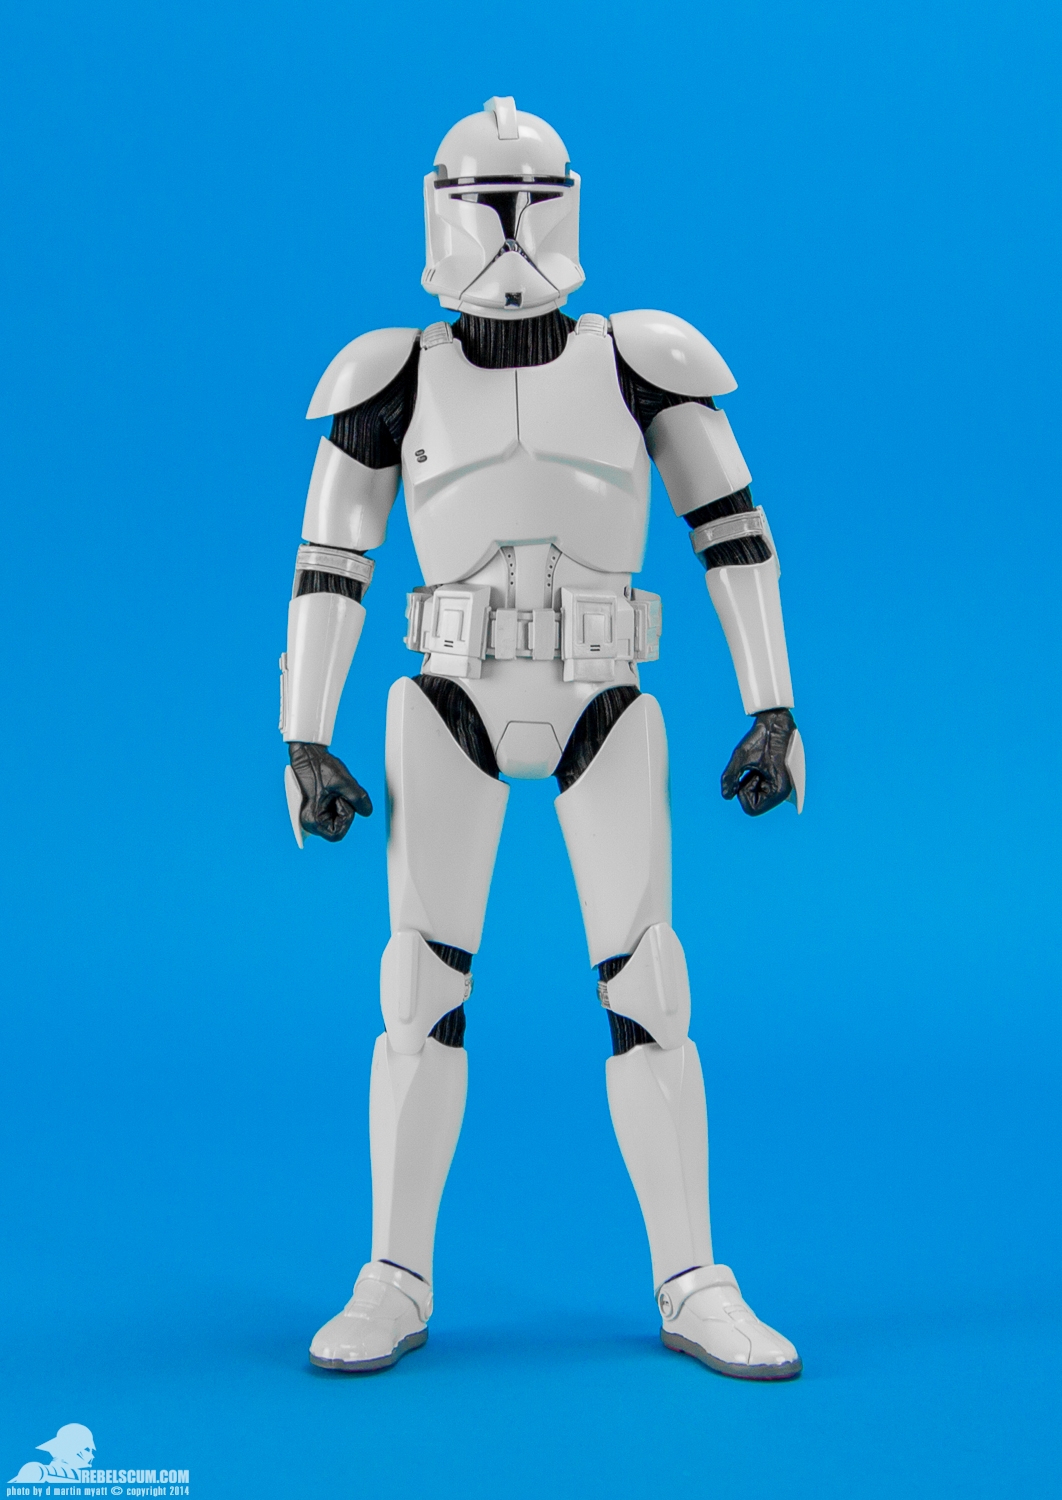 Shiny-Clone-Trooper-Deluxe-Sixth-Scale-Figure-Sideshow-001.jpg